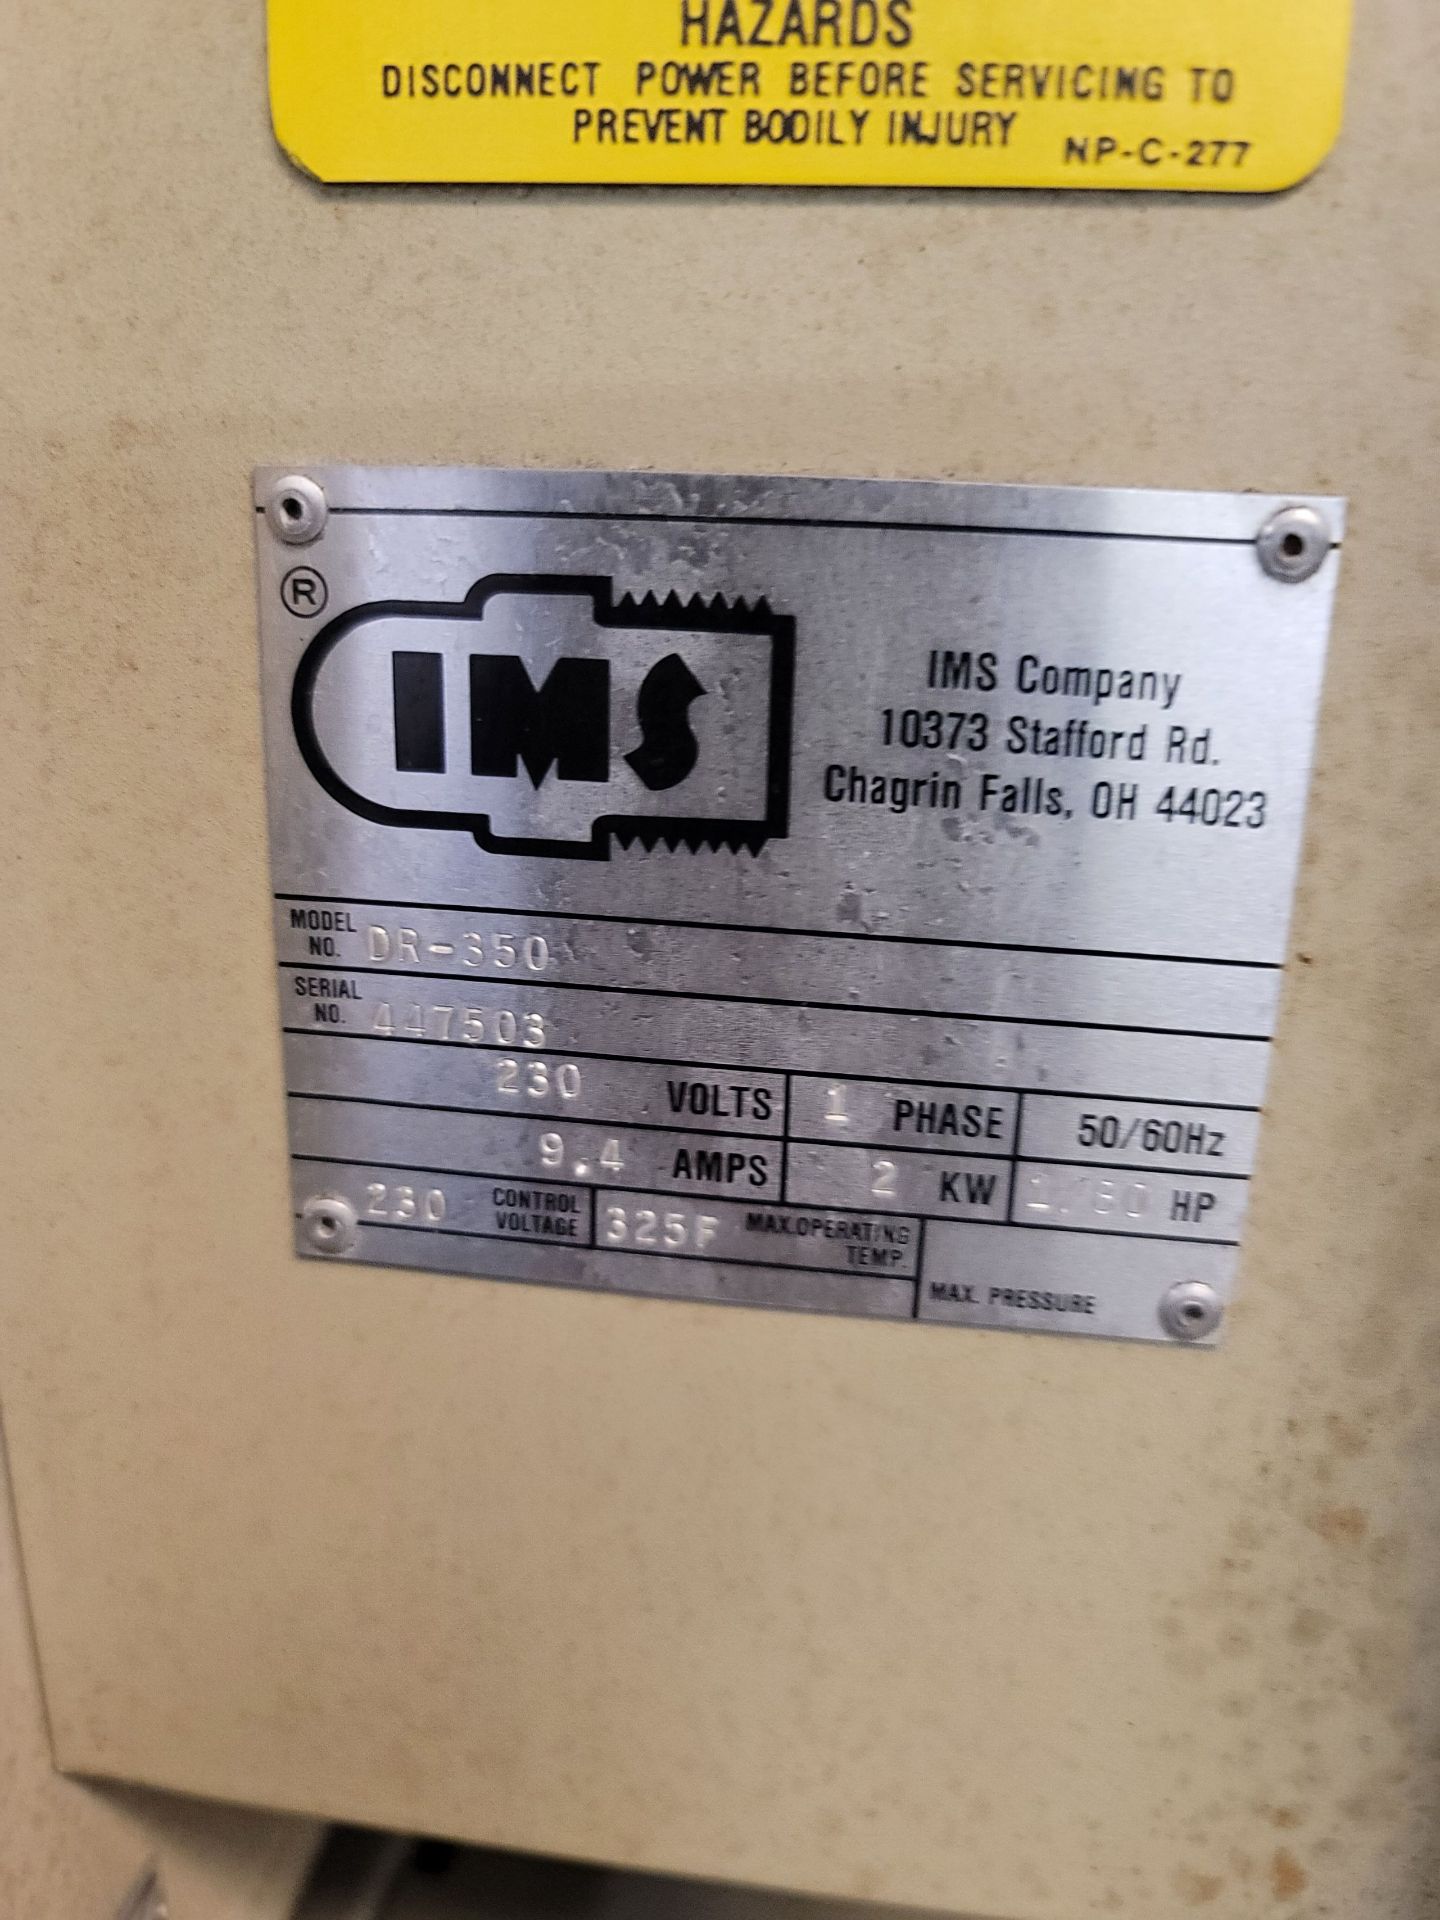 IMS DR-350 MATERIAL DRYING OVEN, 8-DRAWER, BENCH TYPE, 11" X 25", 350° TEMP, S/N 447503 - Image 2 of 2